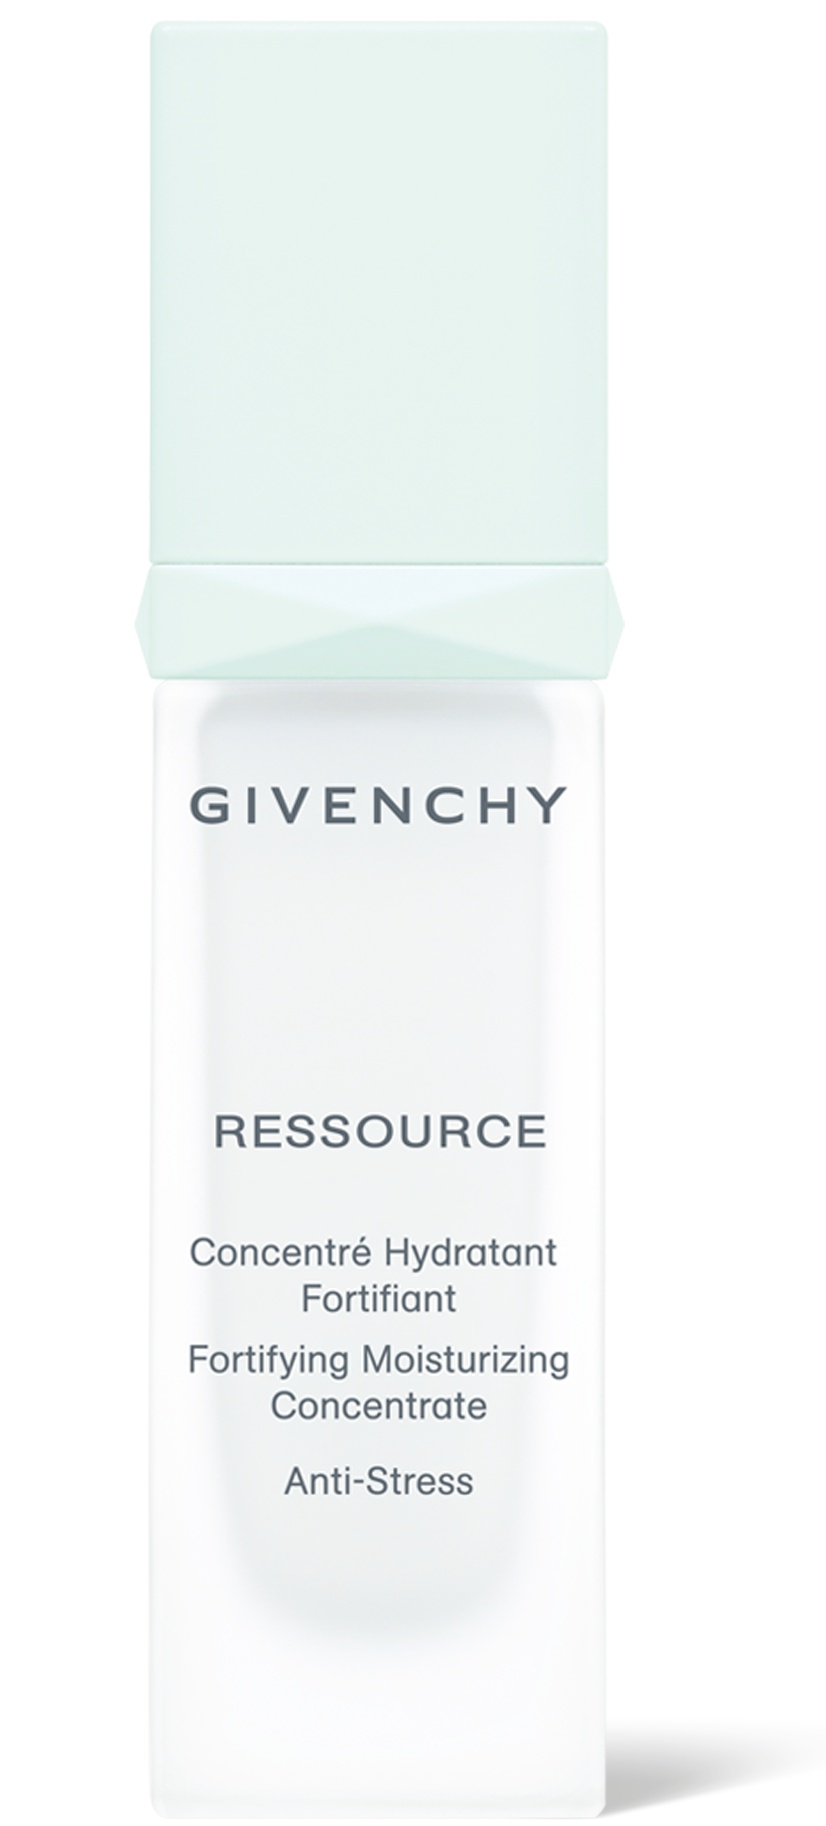 Givenchy Ressource Serum Fortifying Moisturizing Concentrate Anti-Stress